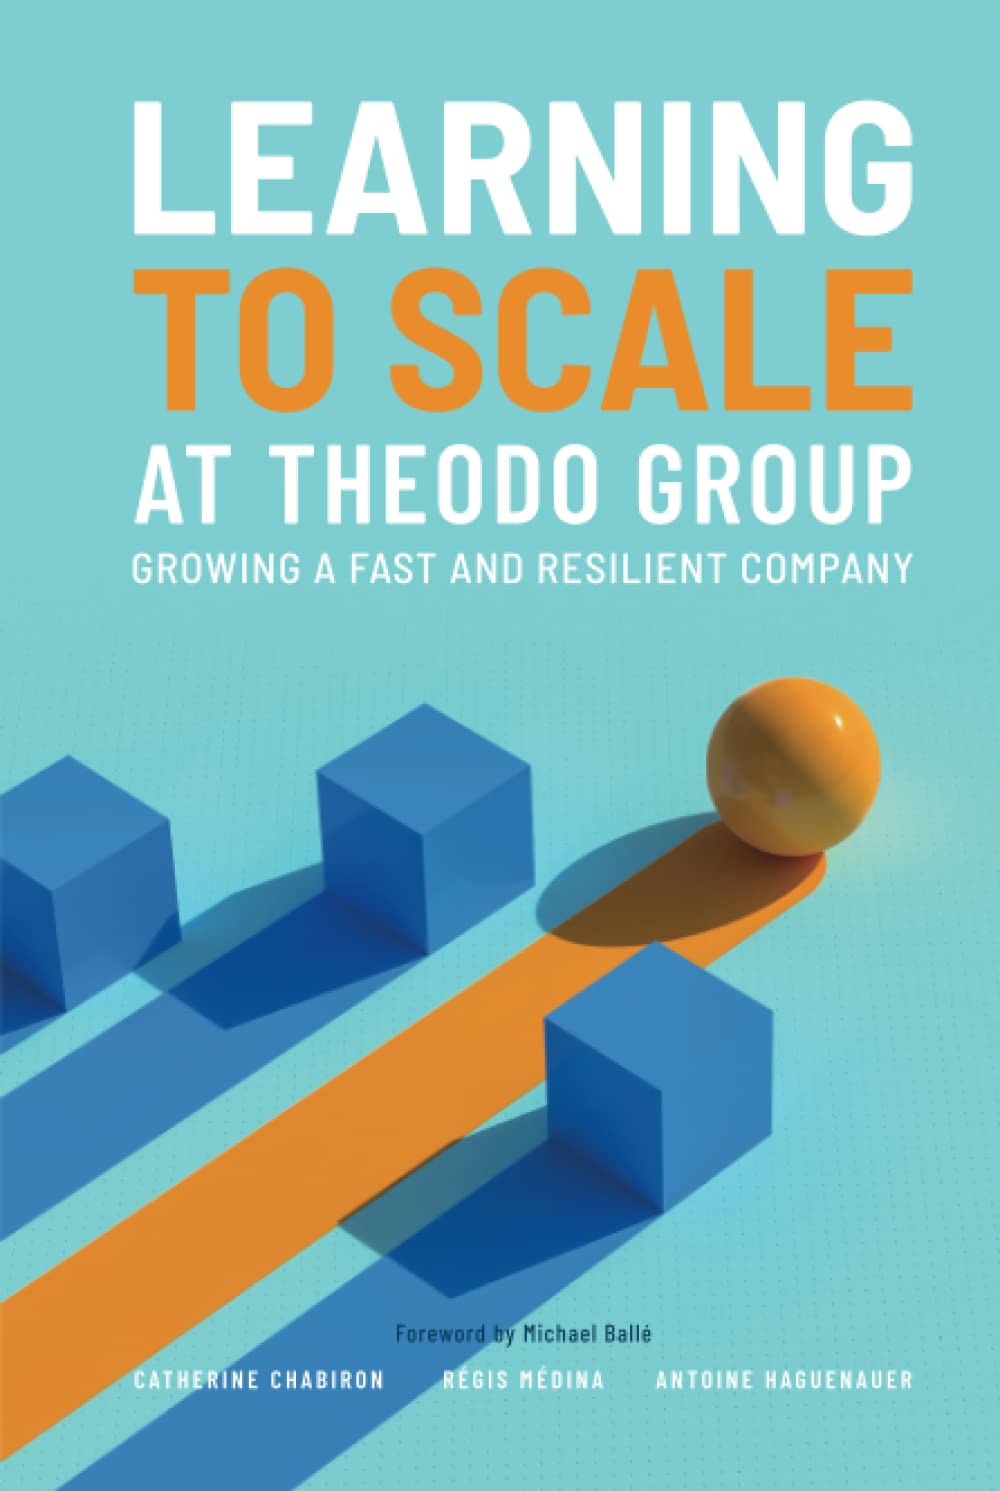 Learning to Scale at Theodo (C. Chabiron, R. Medina)